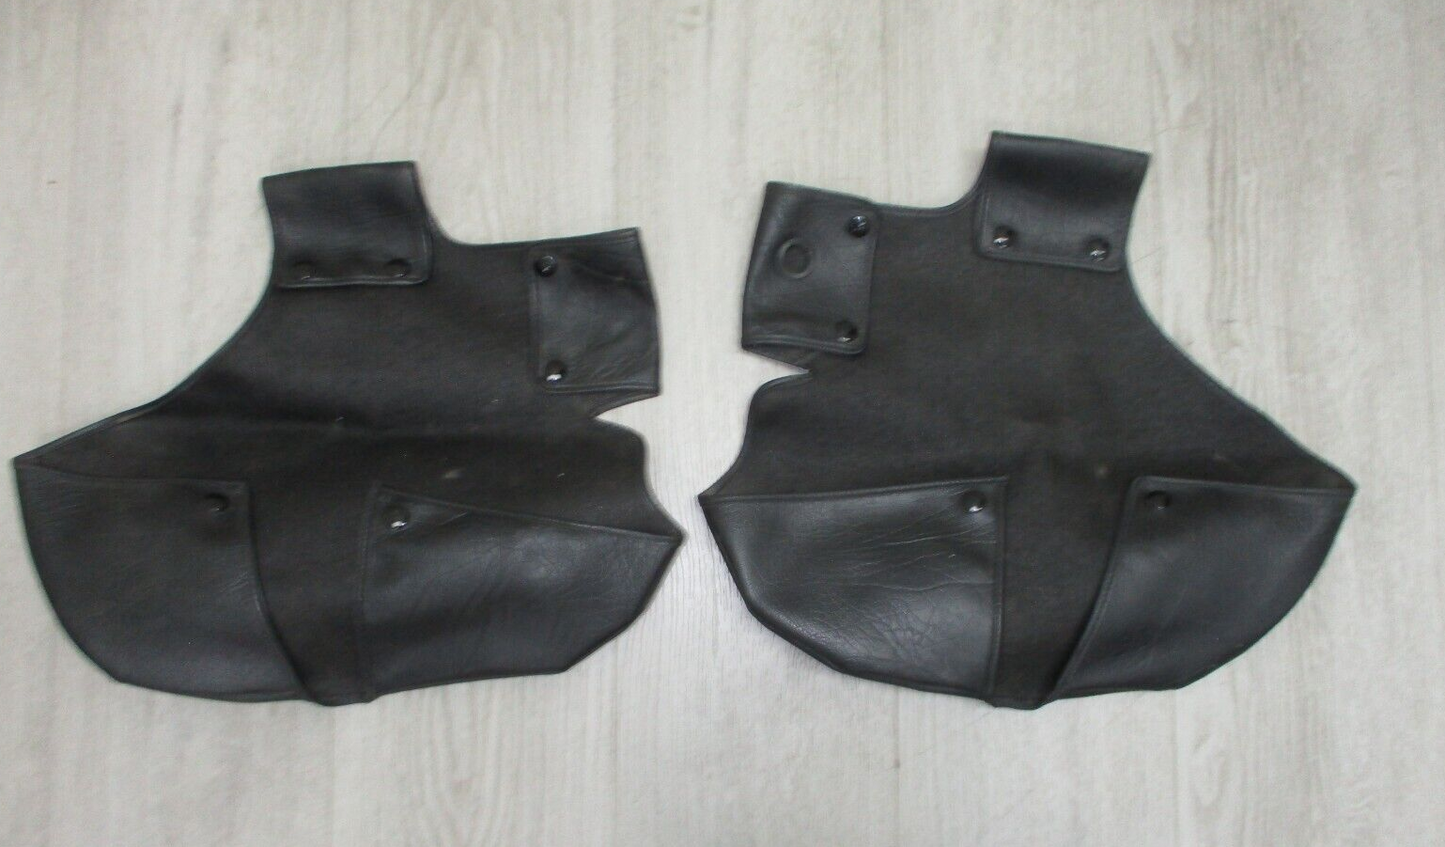 Unbranded Engine Guard Chaps for Harley Touring Models